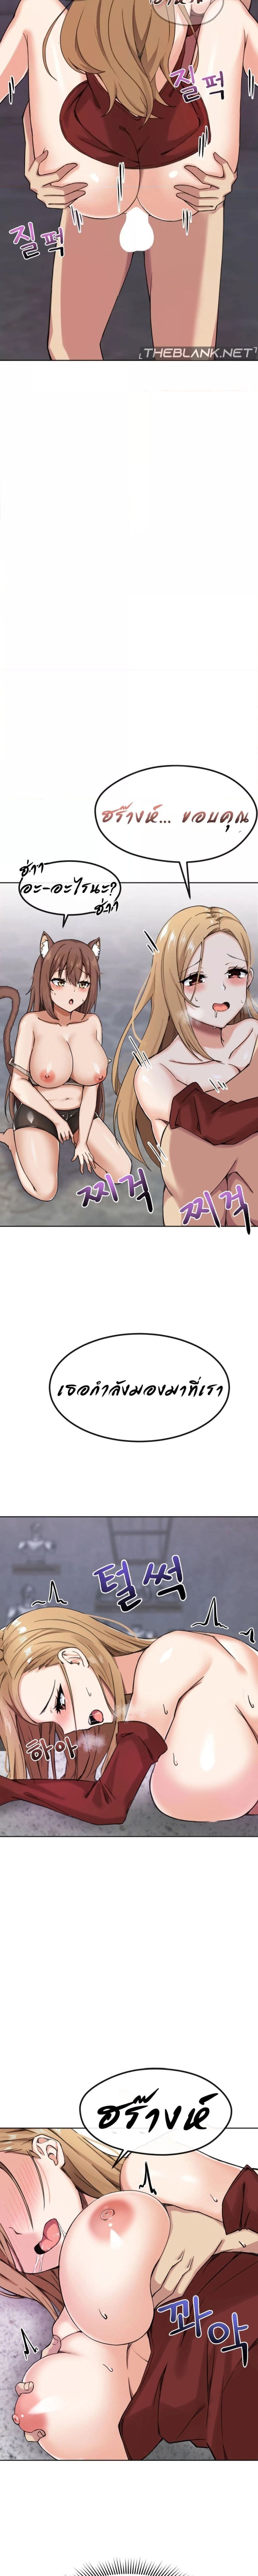 Meat Doll Workshop in Another World ตอนที่ 2 ภาพ 14